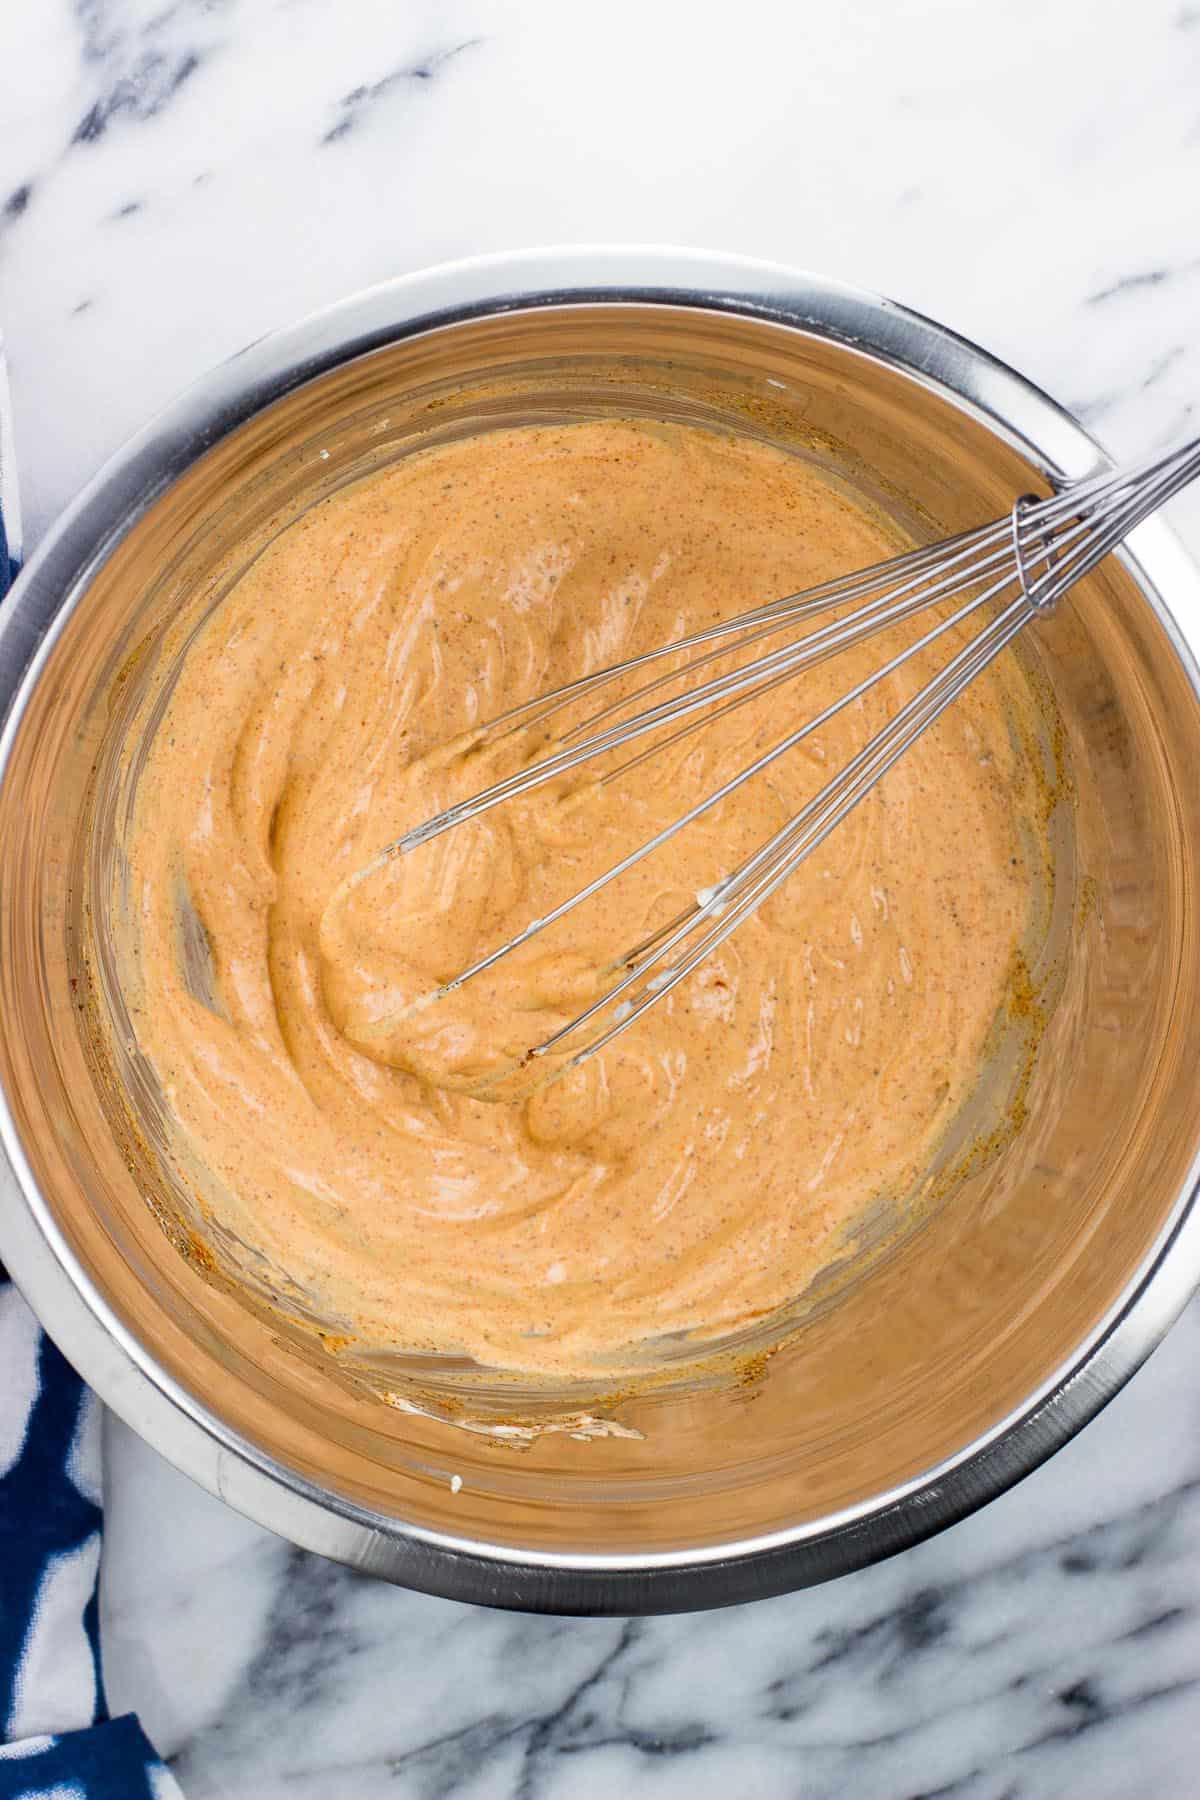 Smoky chicken salad sauce in a metal mixing bowl with a whisk.